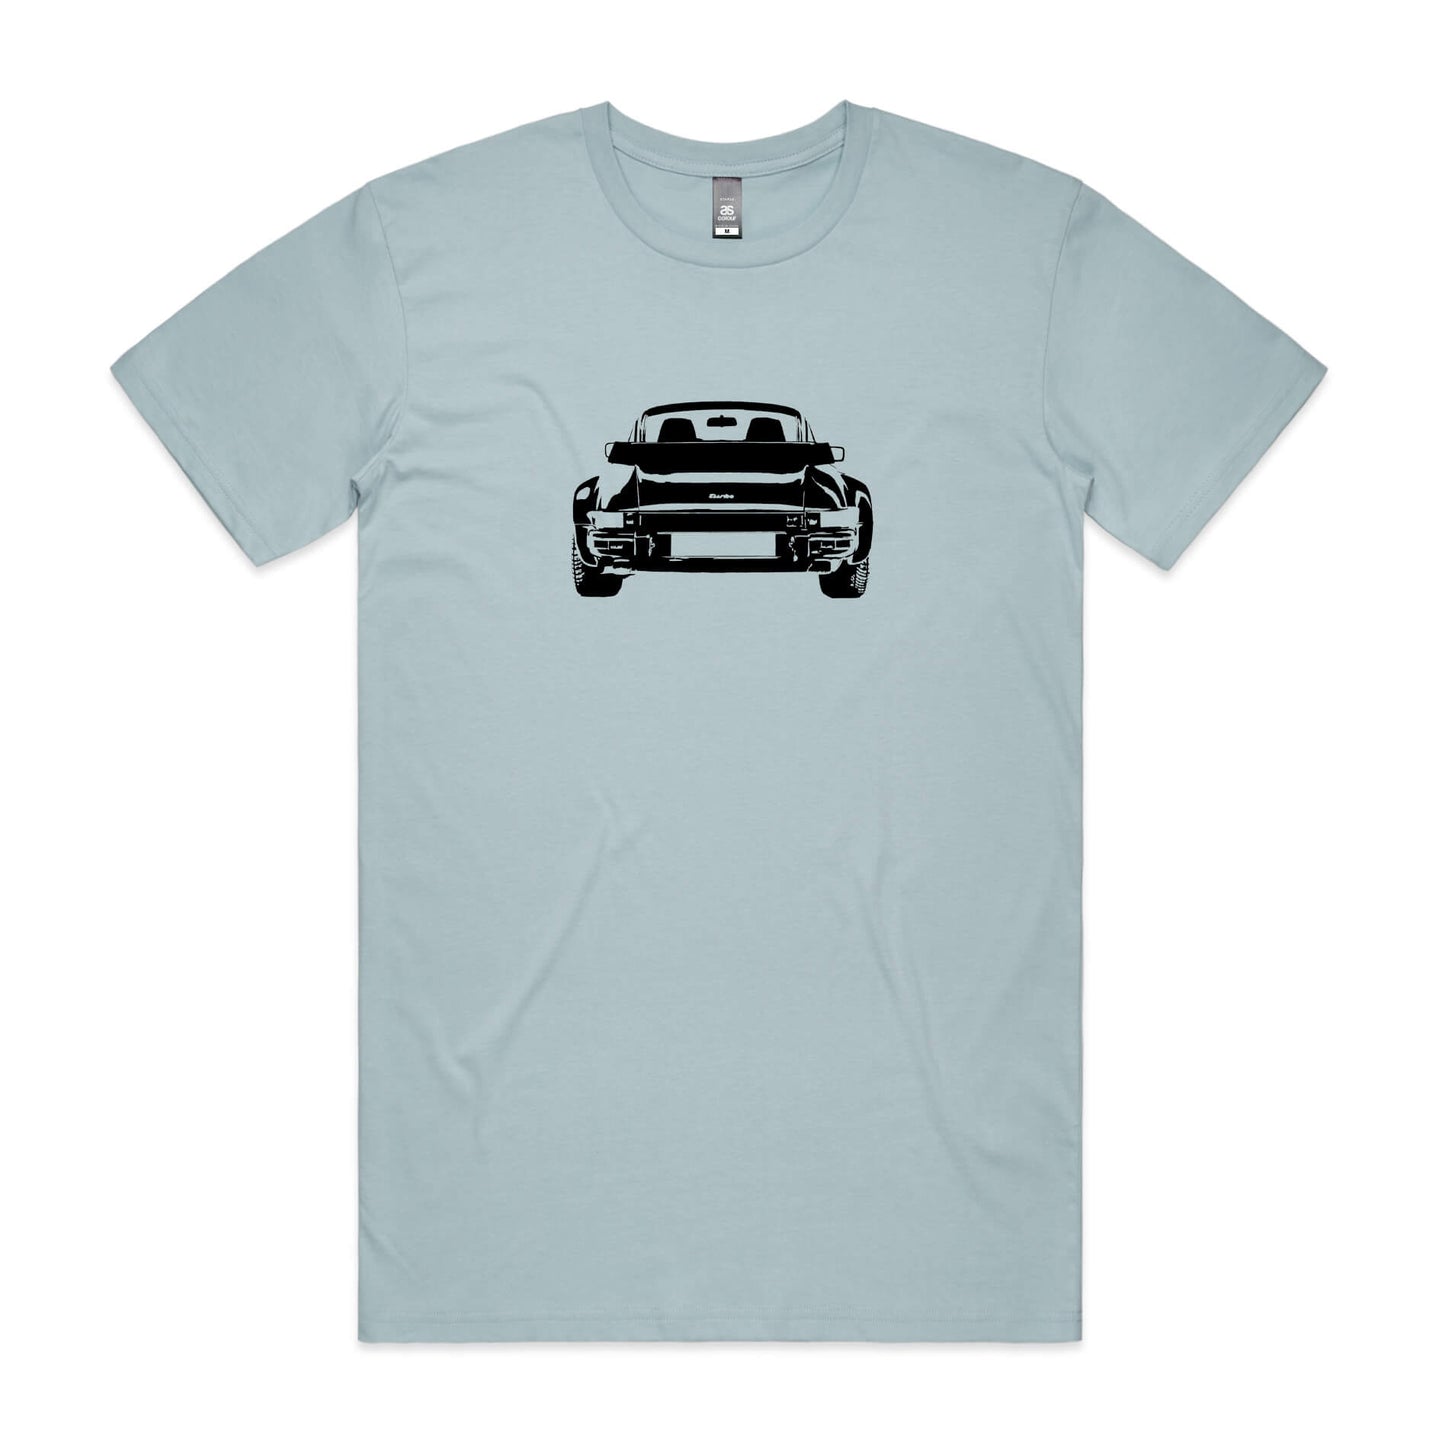 Porsche 911 turbo t-shirt in light blue with a black car graphic